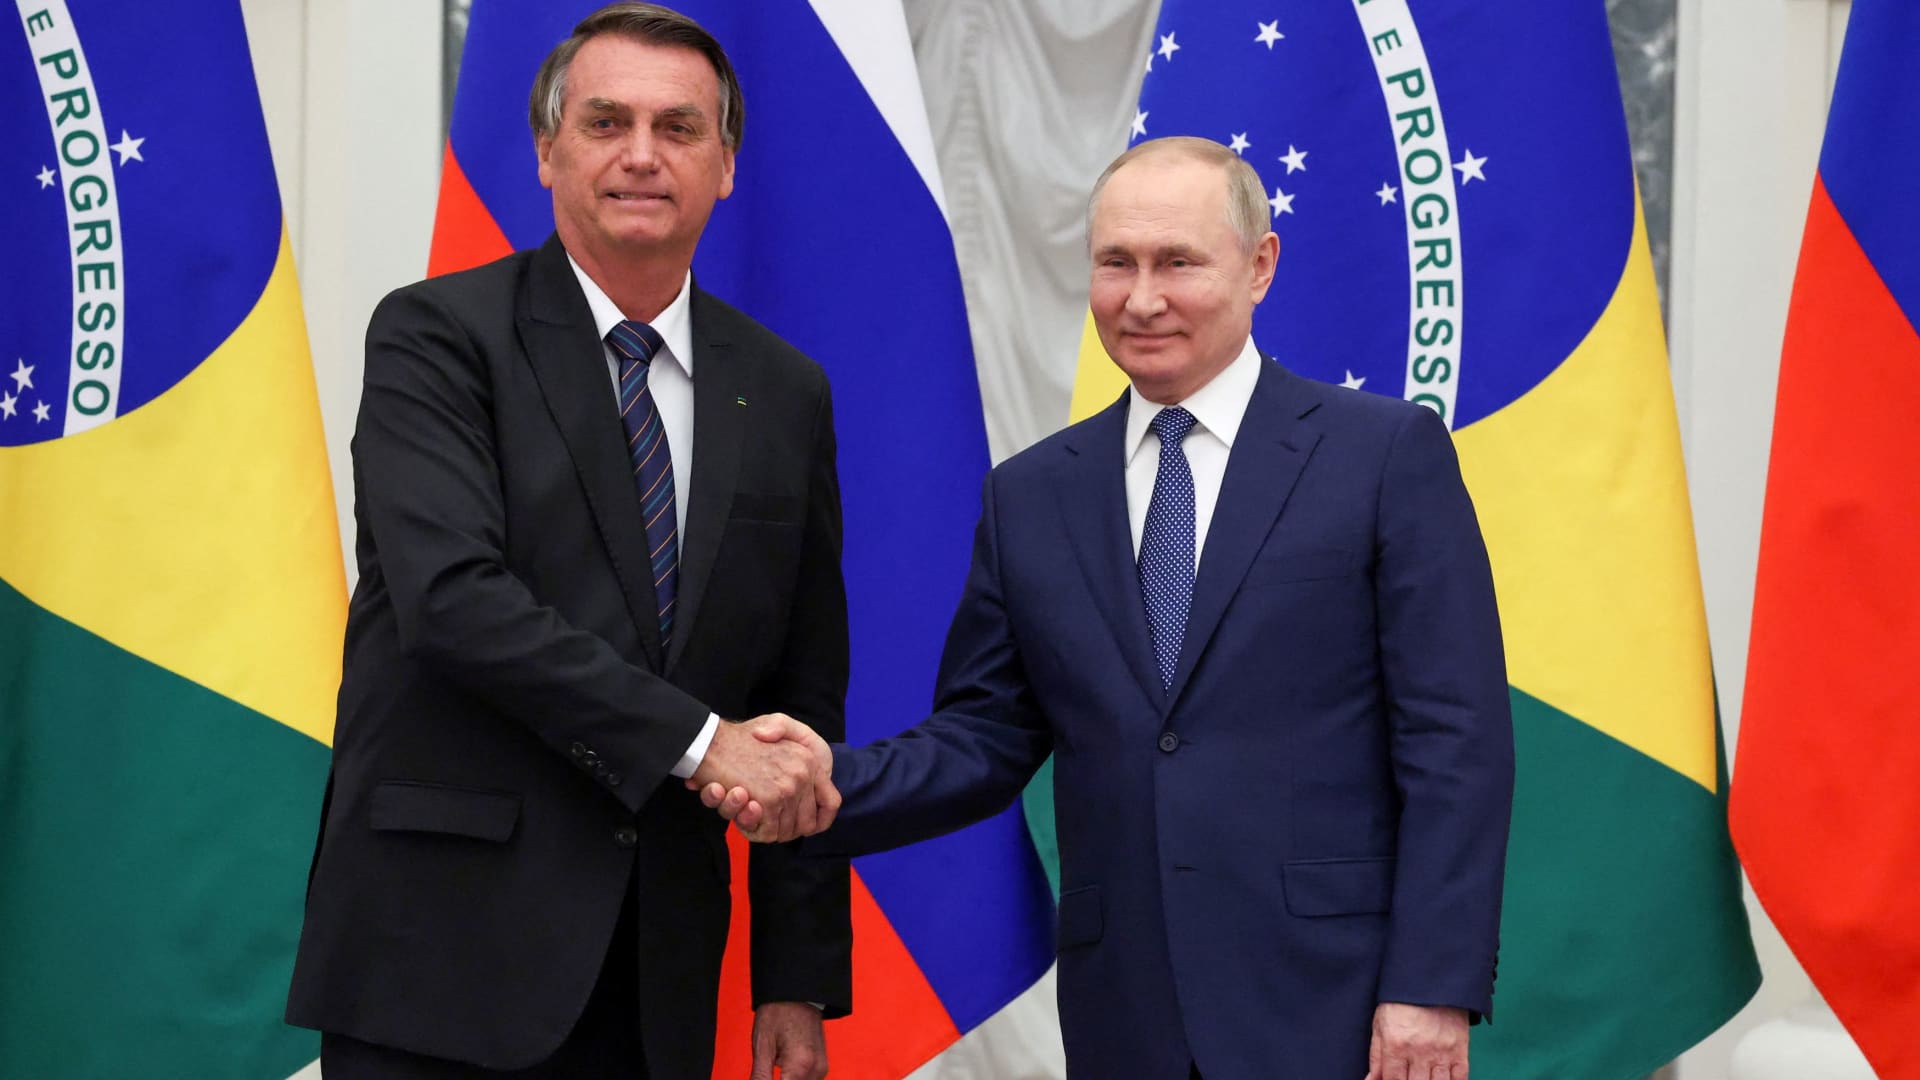 Russian President Vladimir Putin and his Brazilian counterpart Jair Bolsonaro shake hands during a news conference following their talks in Moscow, Russia February 16, 2022.